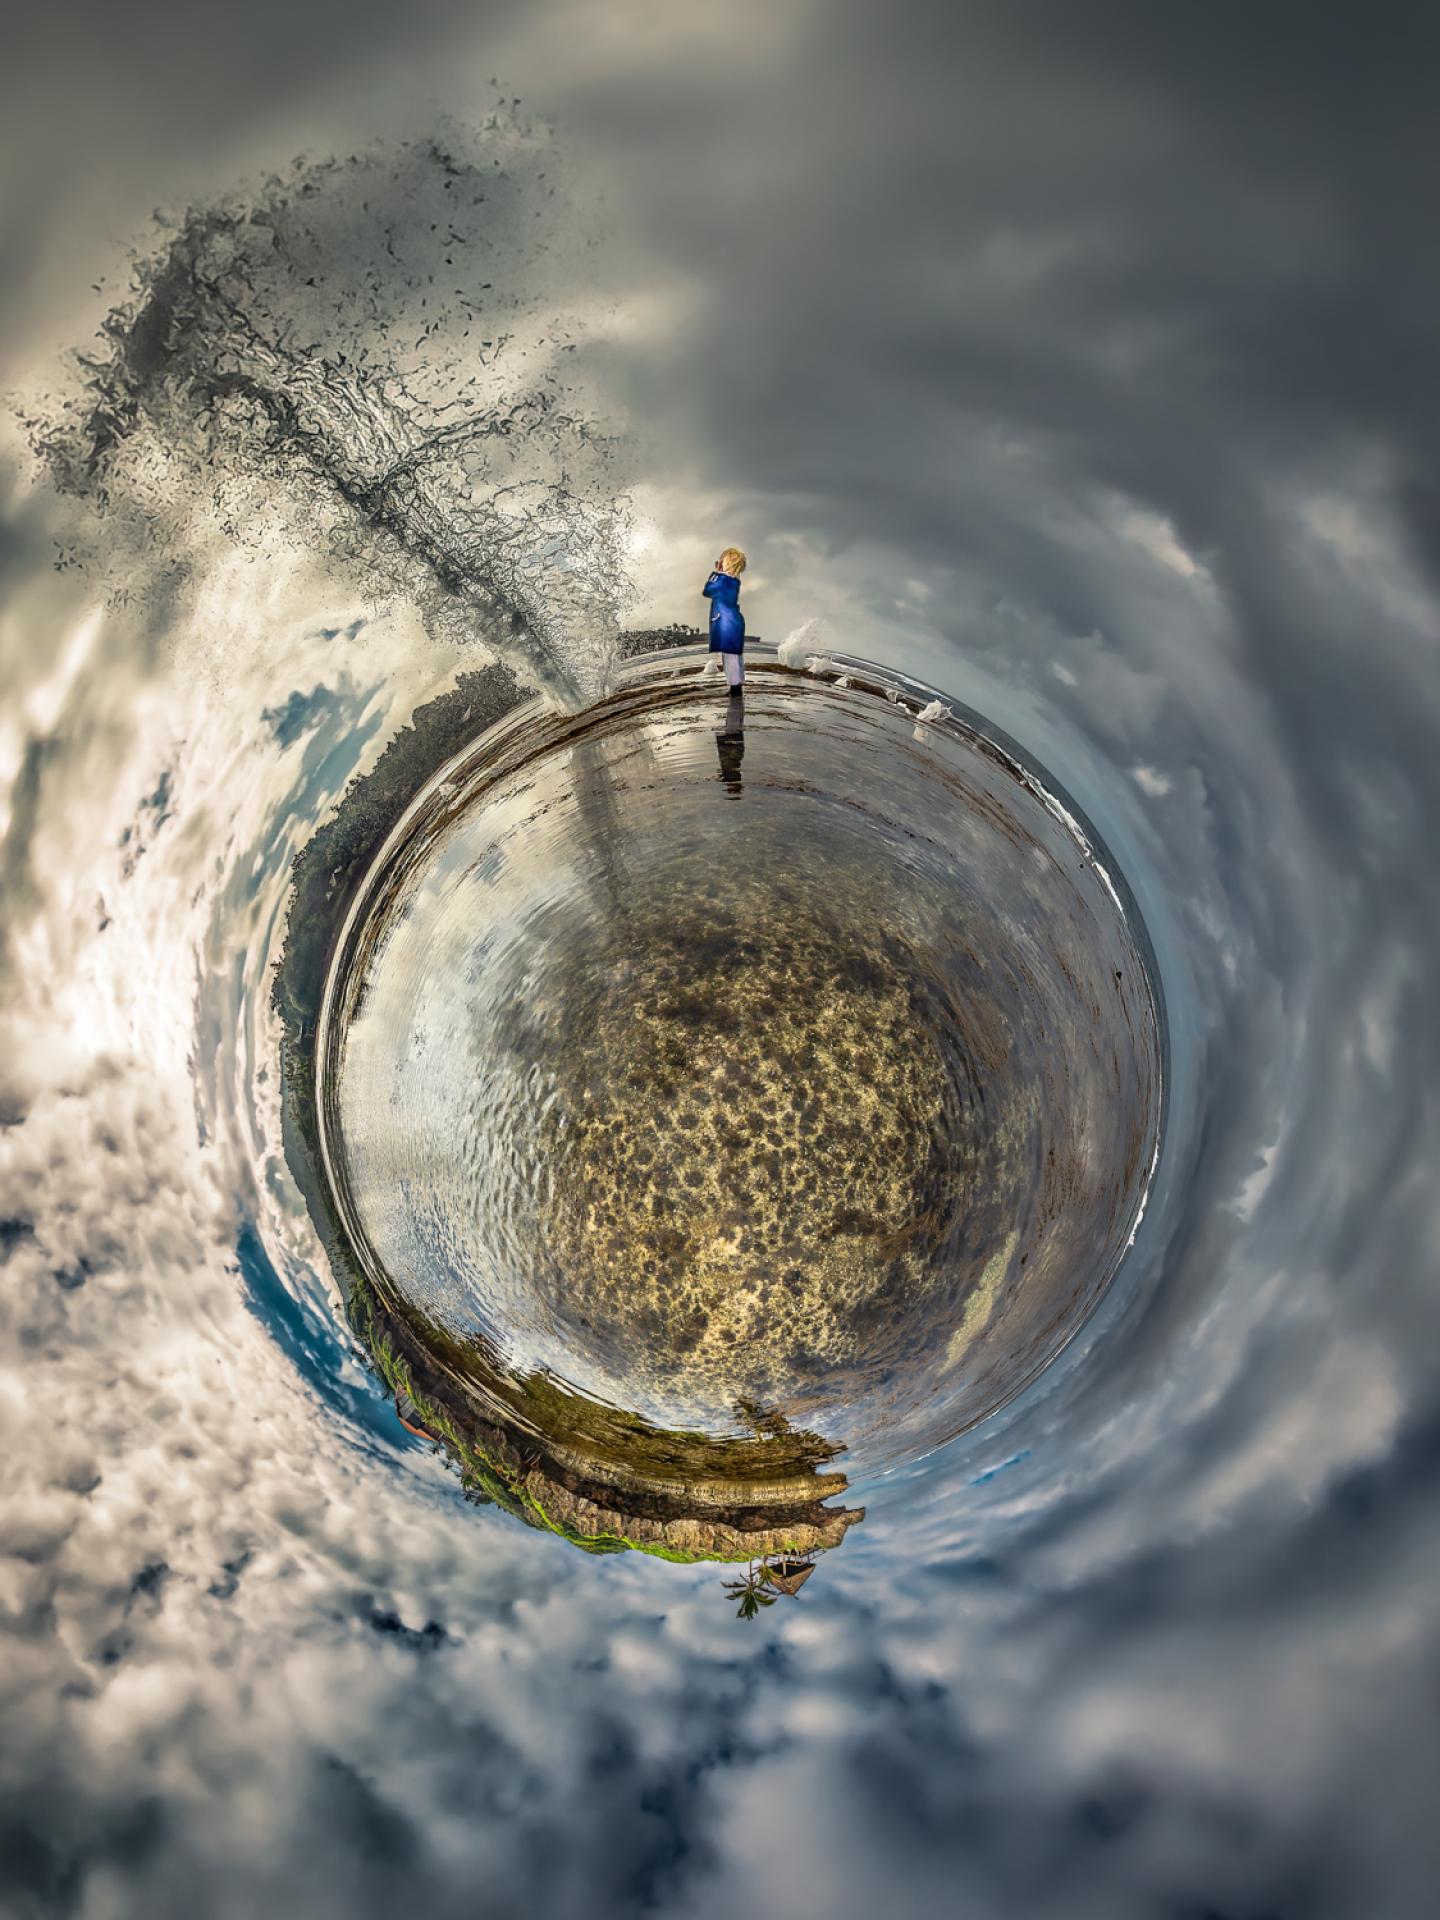 New York Photography Awards Winner - Planets of a Tiny Prince